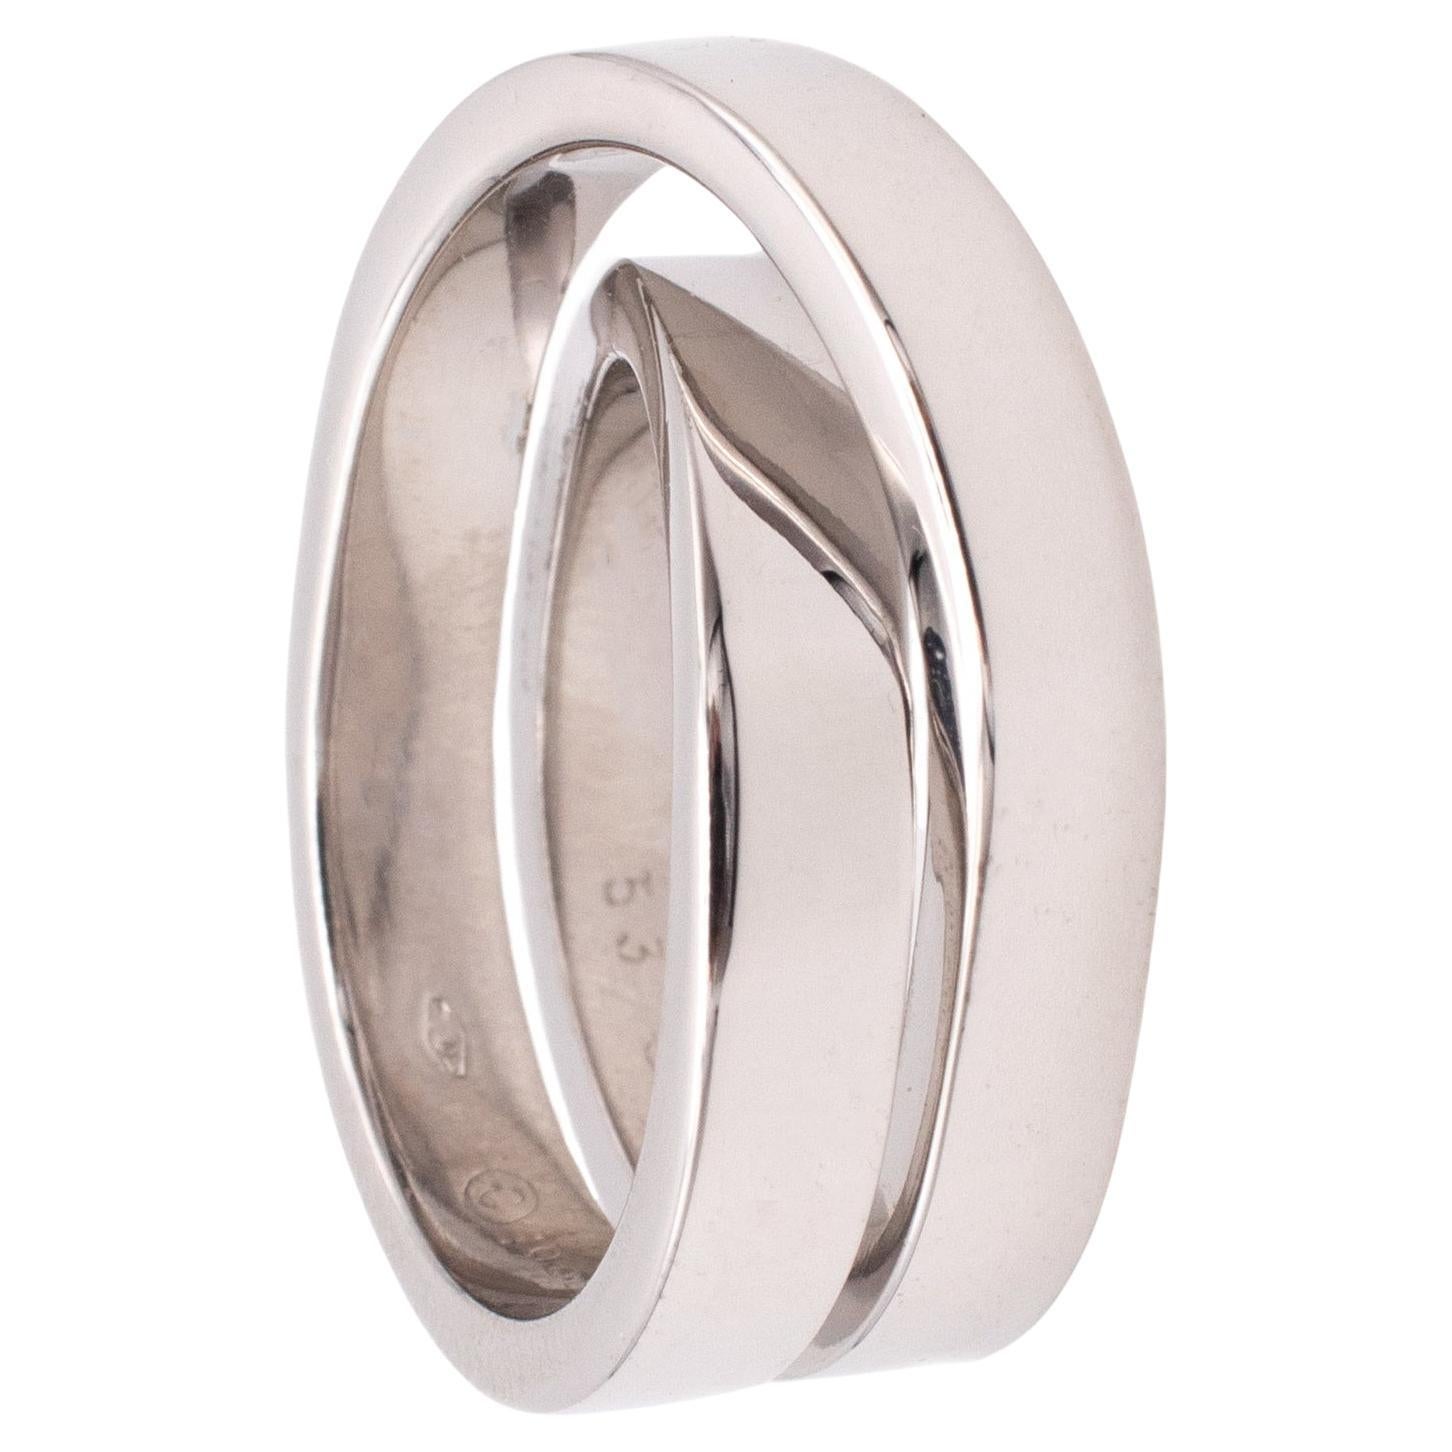 Cartier Paris Modern Nouvelle Bague Twisted Ring in Solid 18Kt White Gold